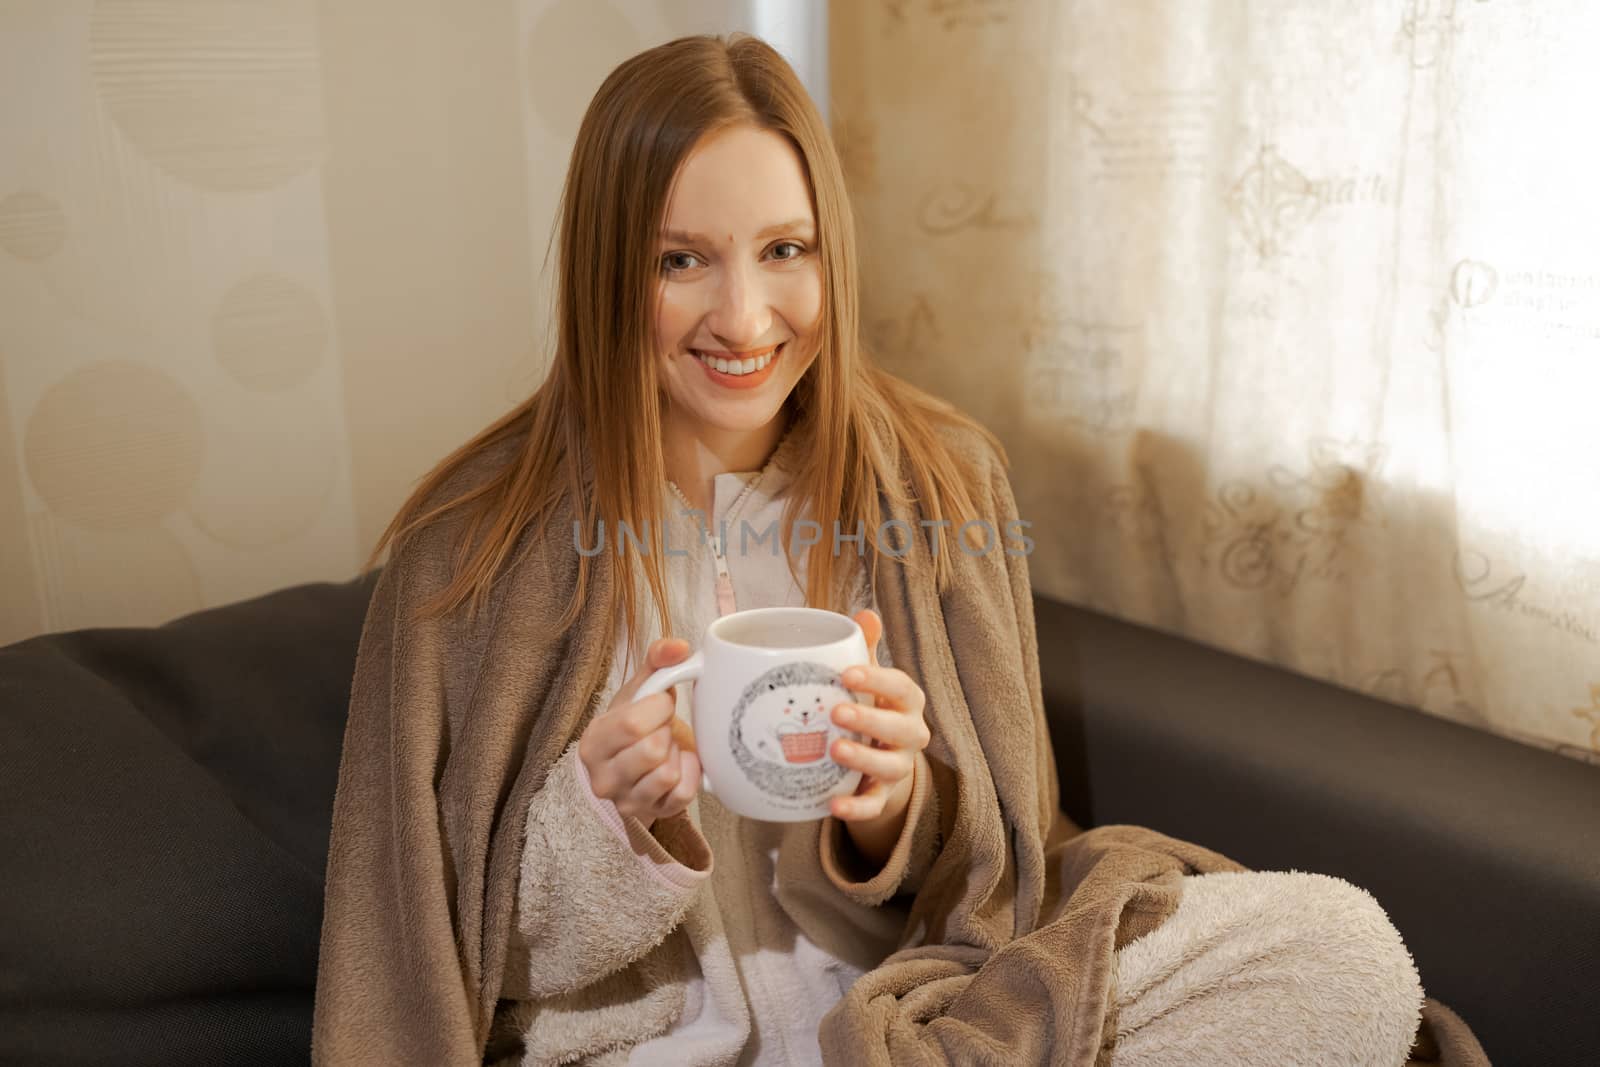 girl with a cup of coffee	or tea